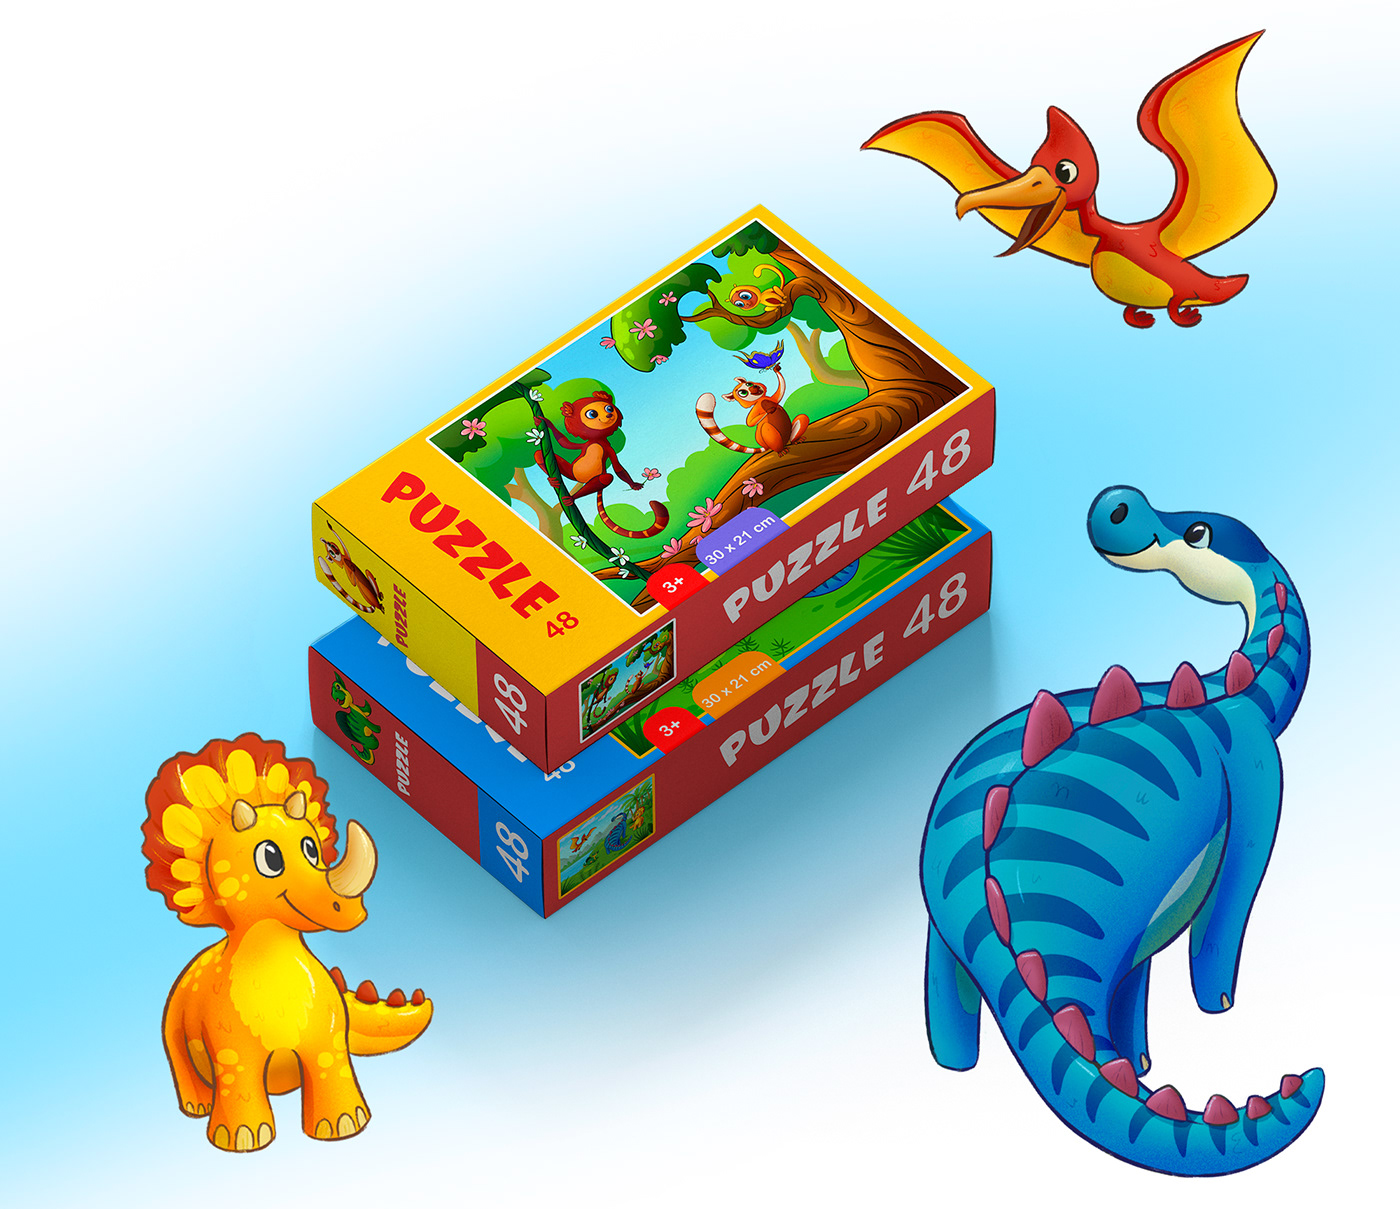 Box and cover design. Dinosaur characters